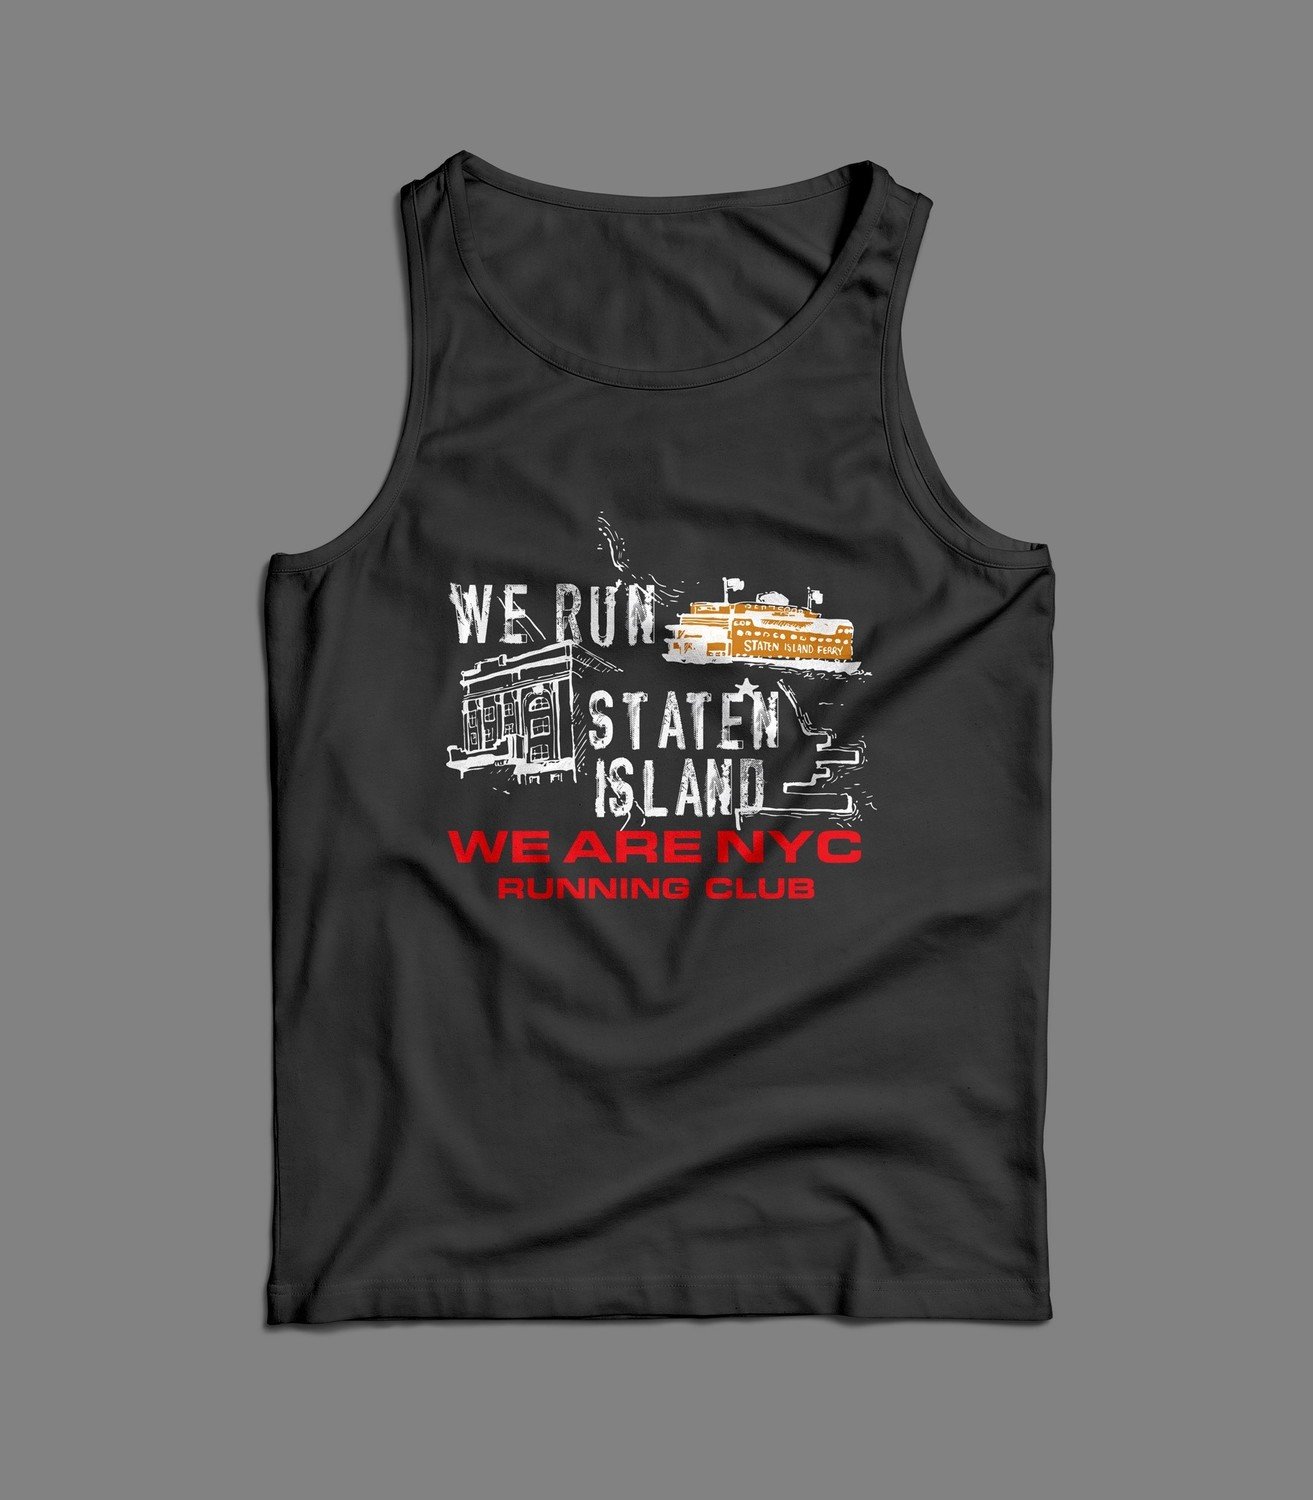 WE ARE NYC - STATEN ISLAND "ICONIC" TANK / SINGLET